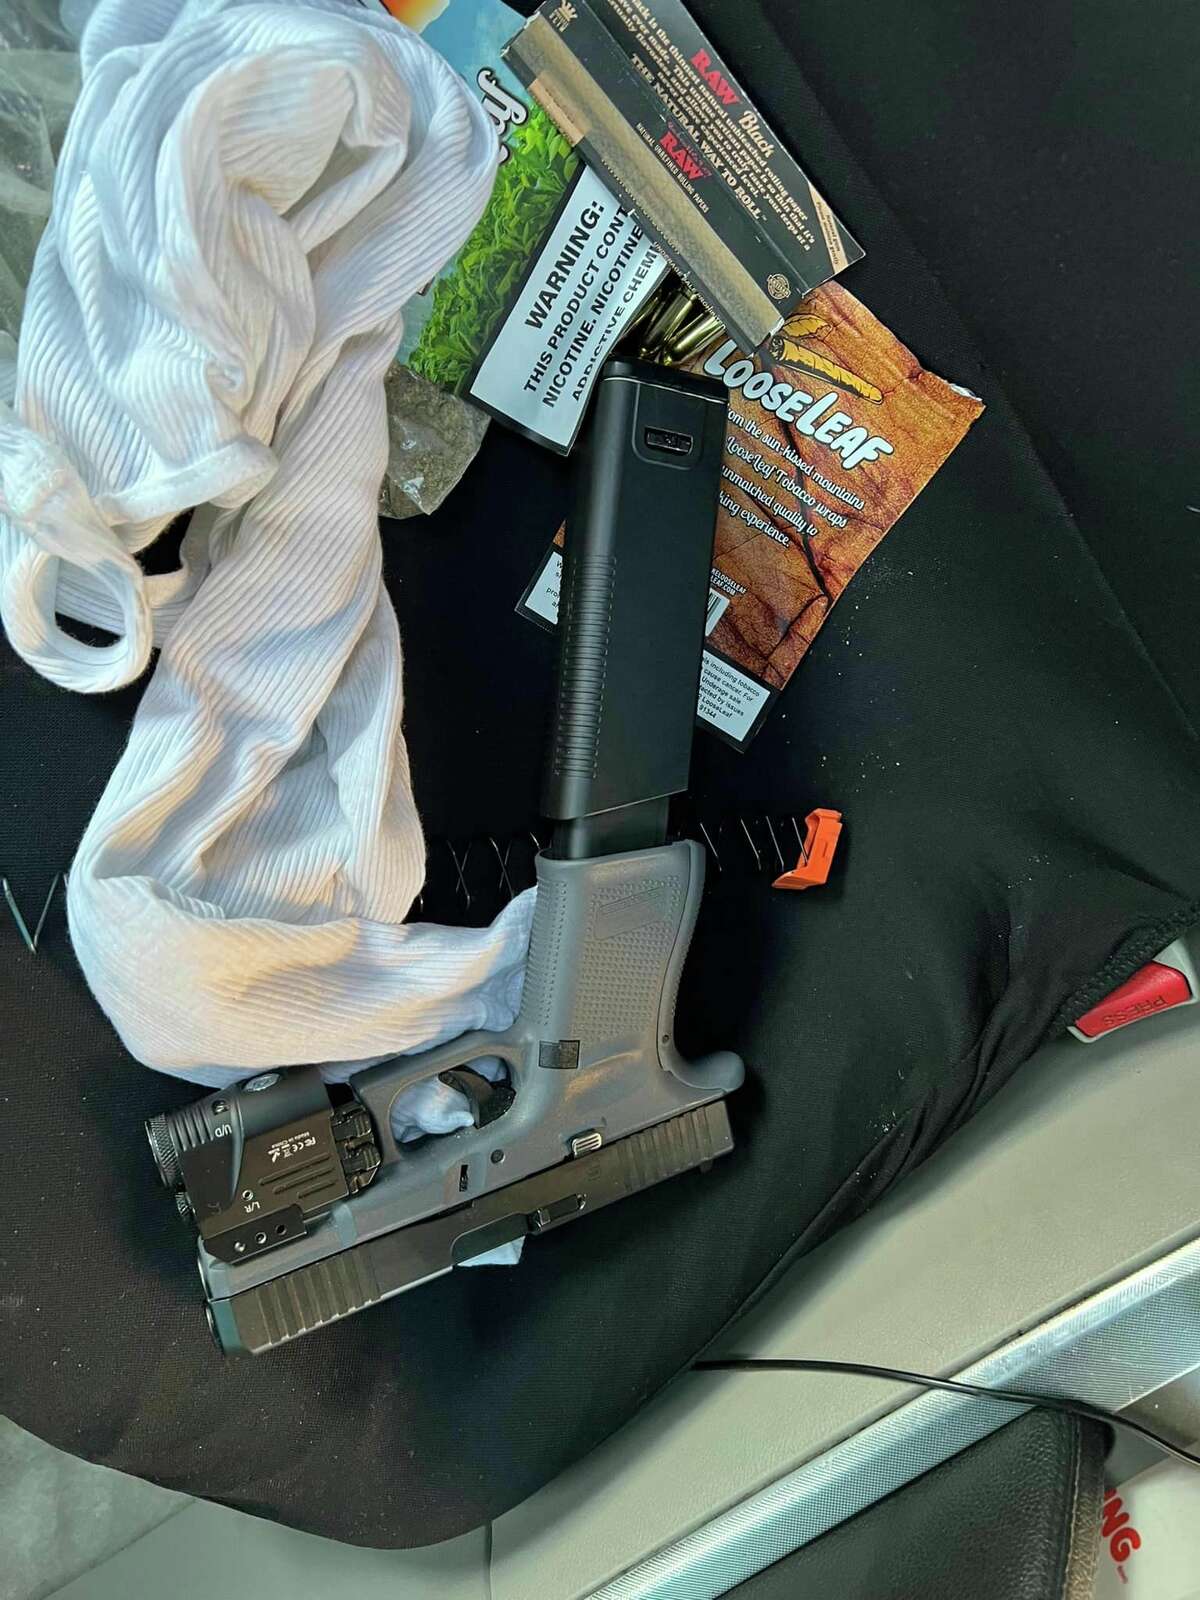 Evidence photos of drugs and guns police said they found in a car during a vandalism call in February.